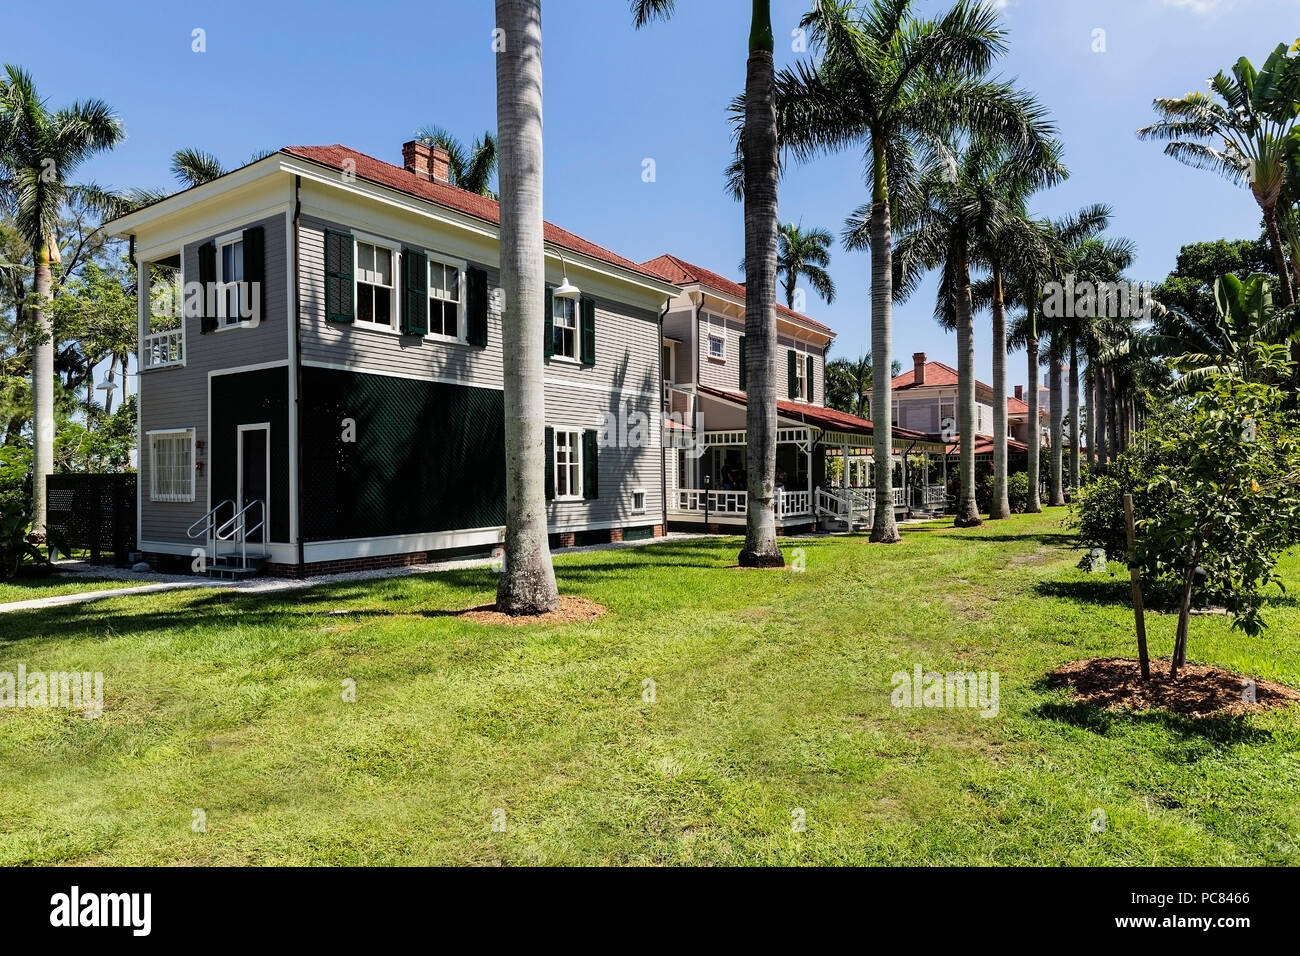 Henry Ford Vacation Home Ft. Myers, Fl Stock Photo